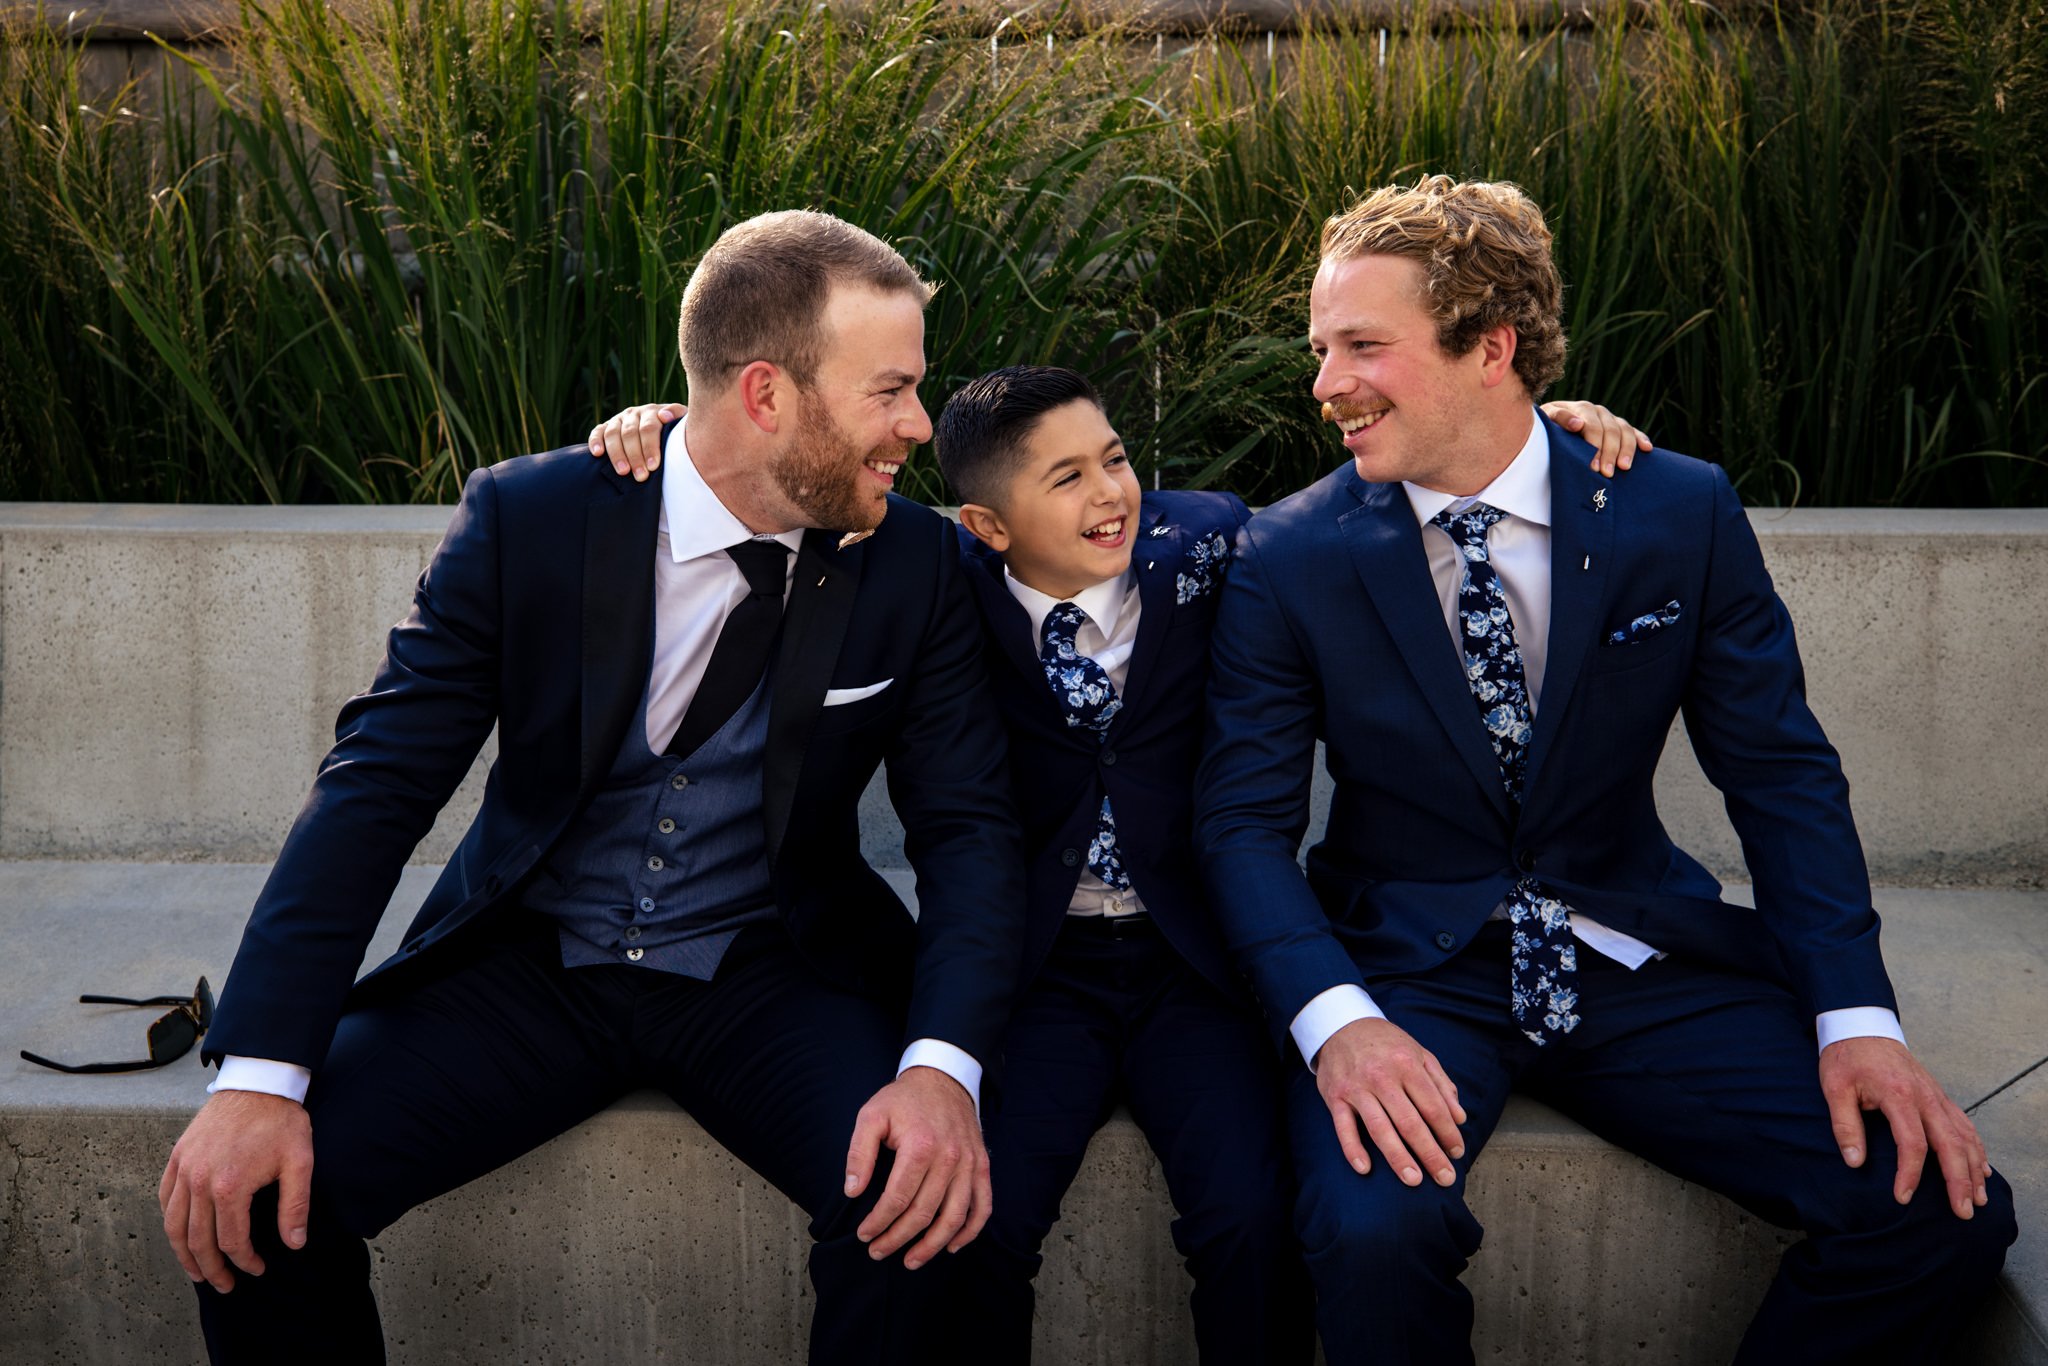 Three best men in suits and ties sitting on a bench.